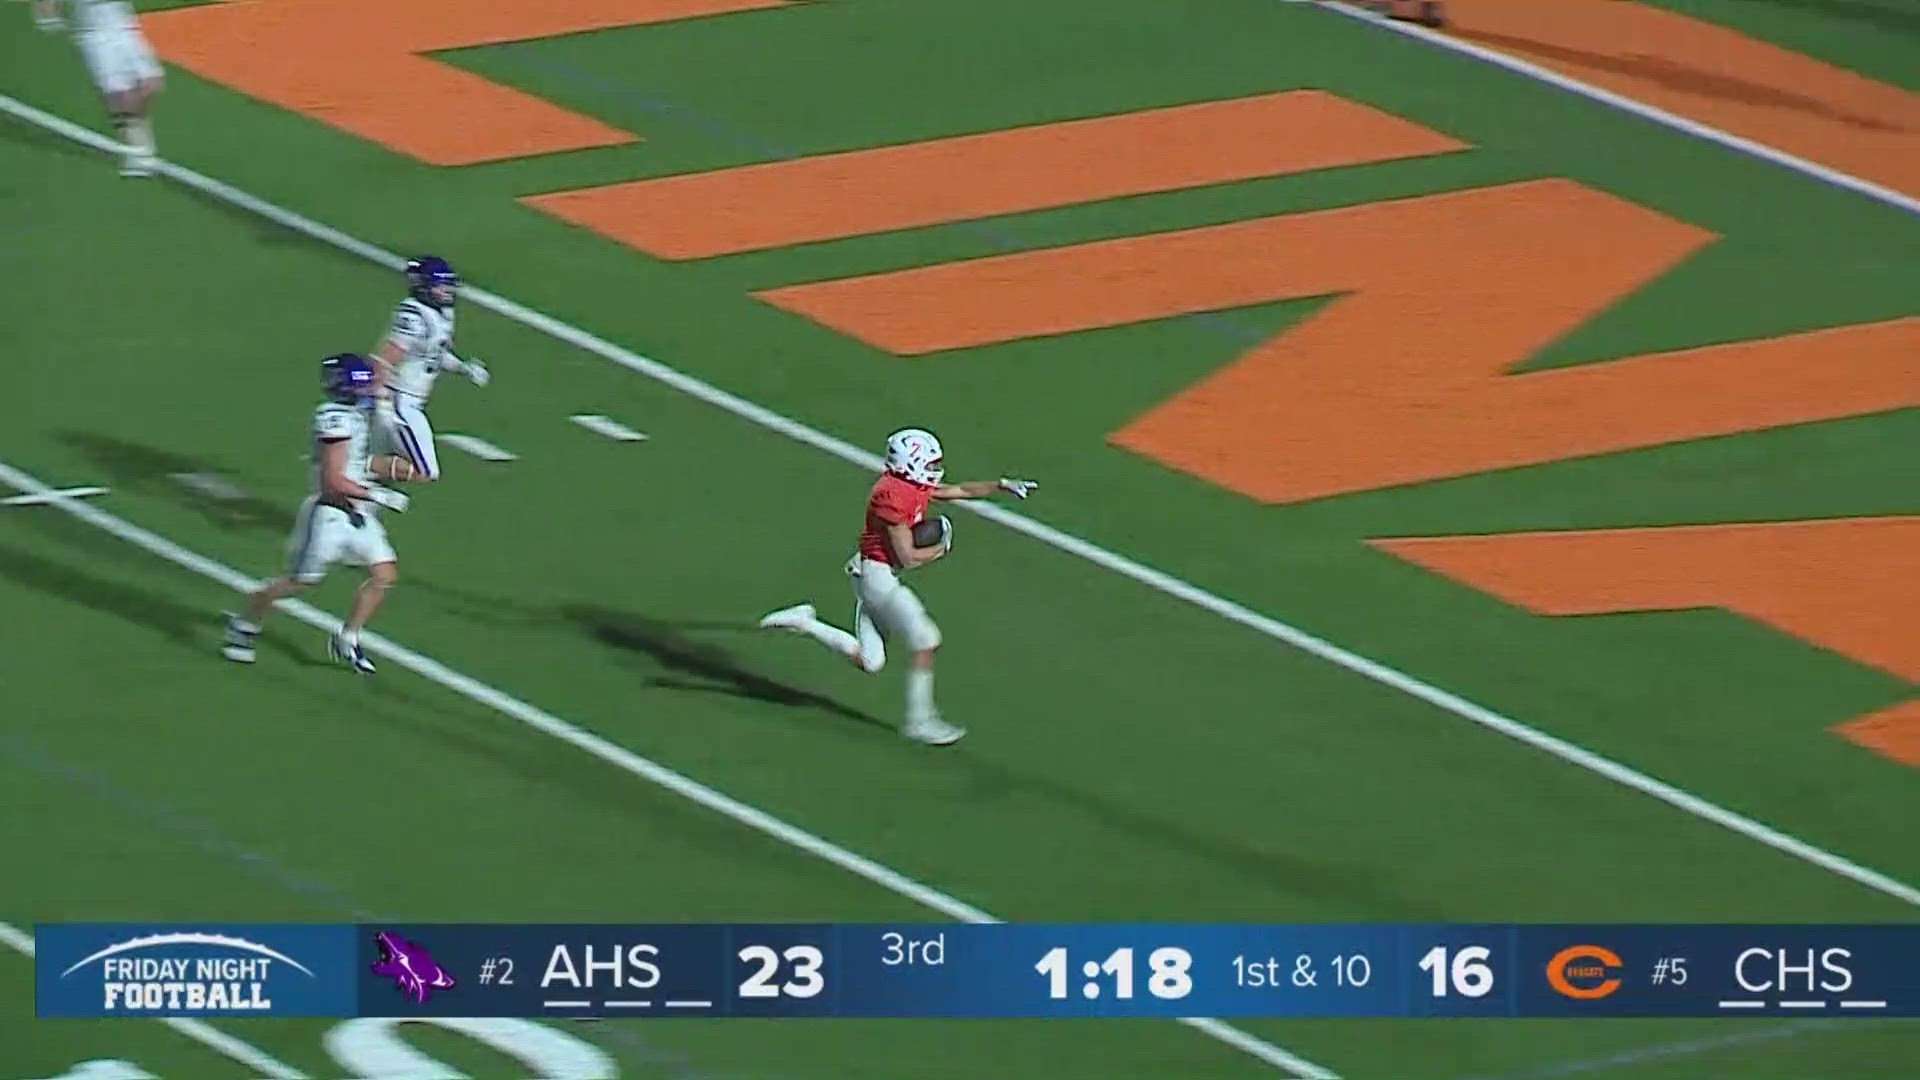 Celina scores 12-yard touchdown to tie up game against Anna | wfaa.com